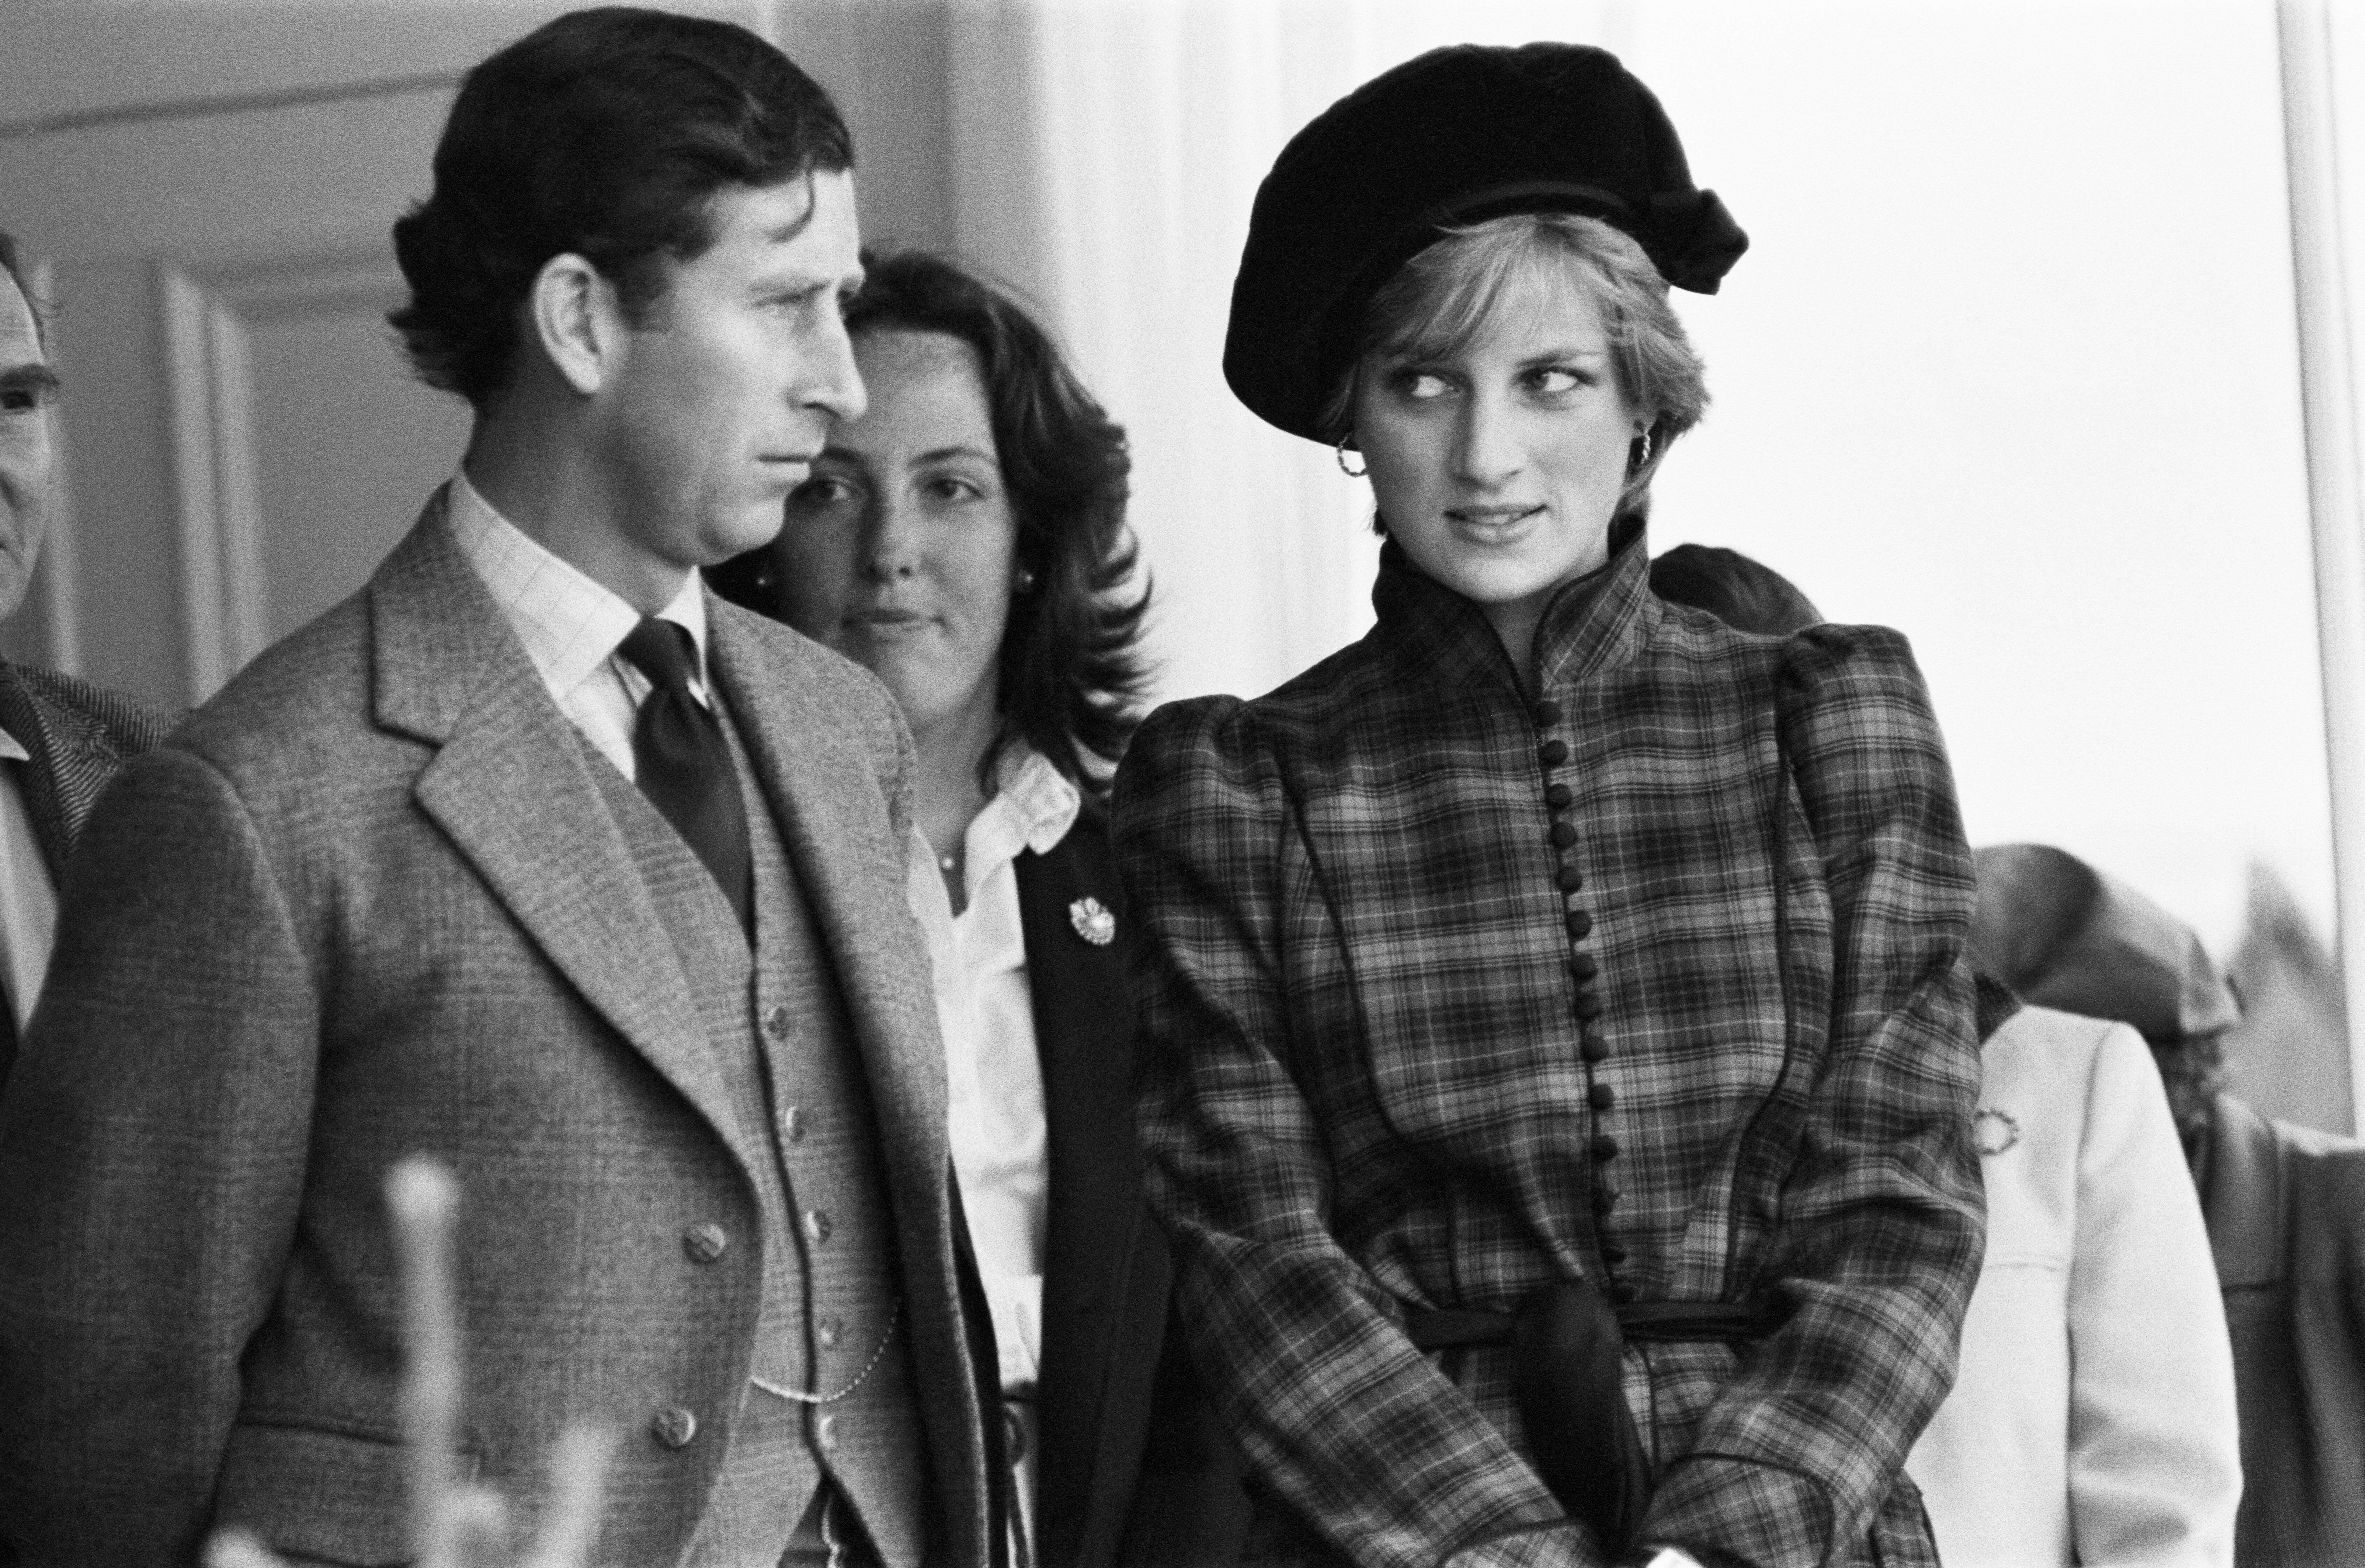 Prince Charles and Princess Diana pictured at Braemar for the Highland games in September 1981. / Source: Getty Images